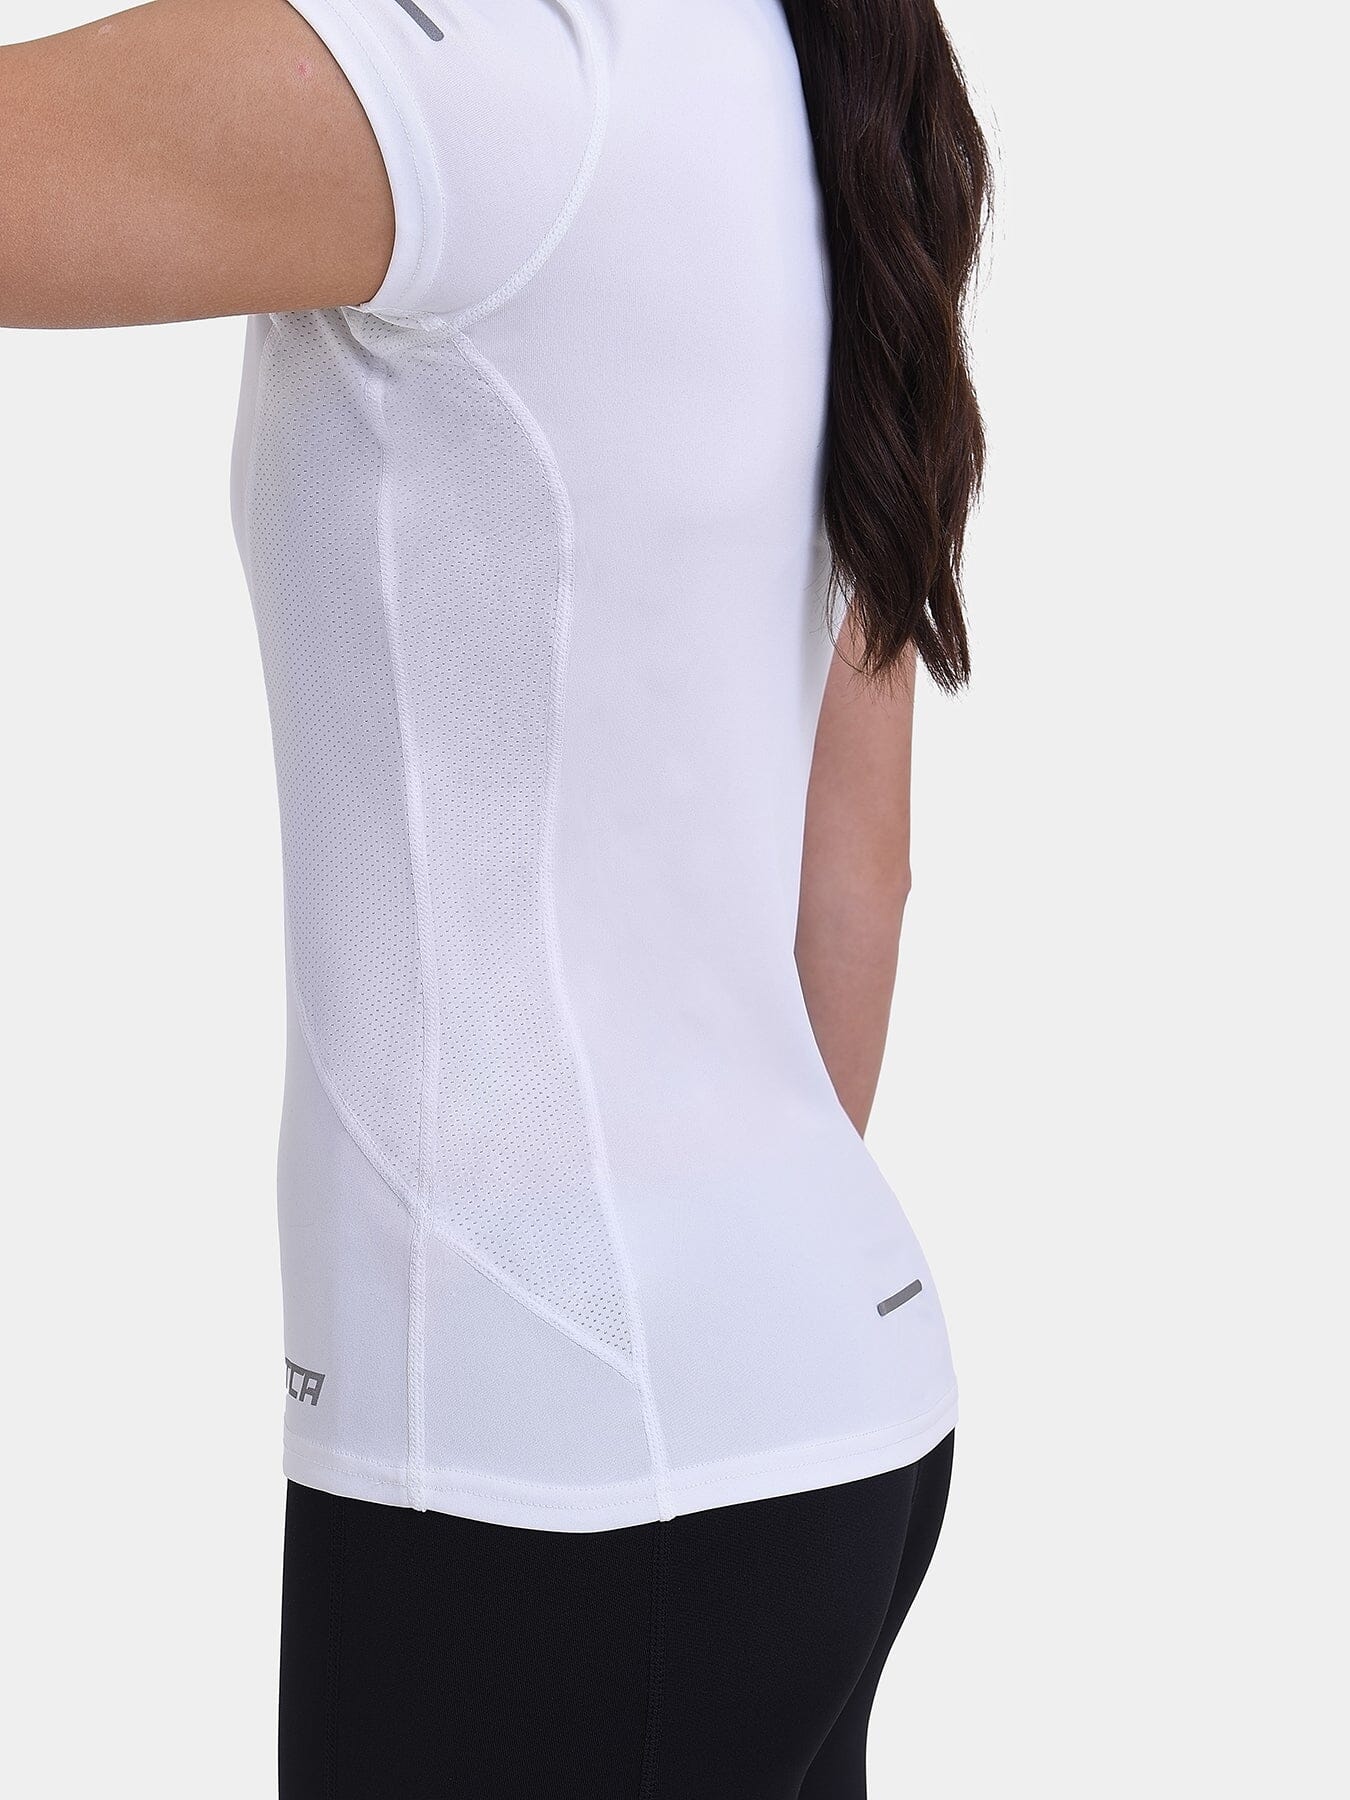 Atomic Short Sleeve T-Shirt With UPF 50+ Protection & Side Mesh Panels For Women